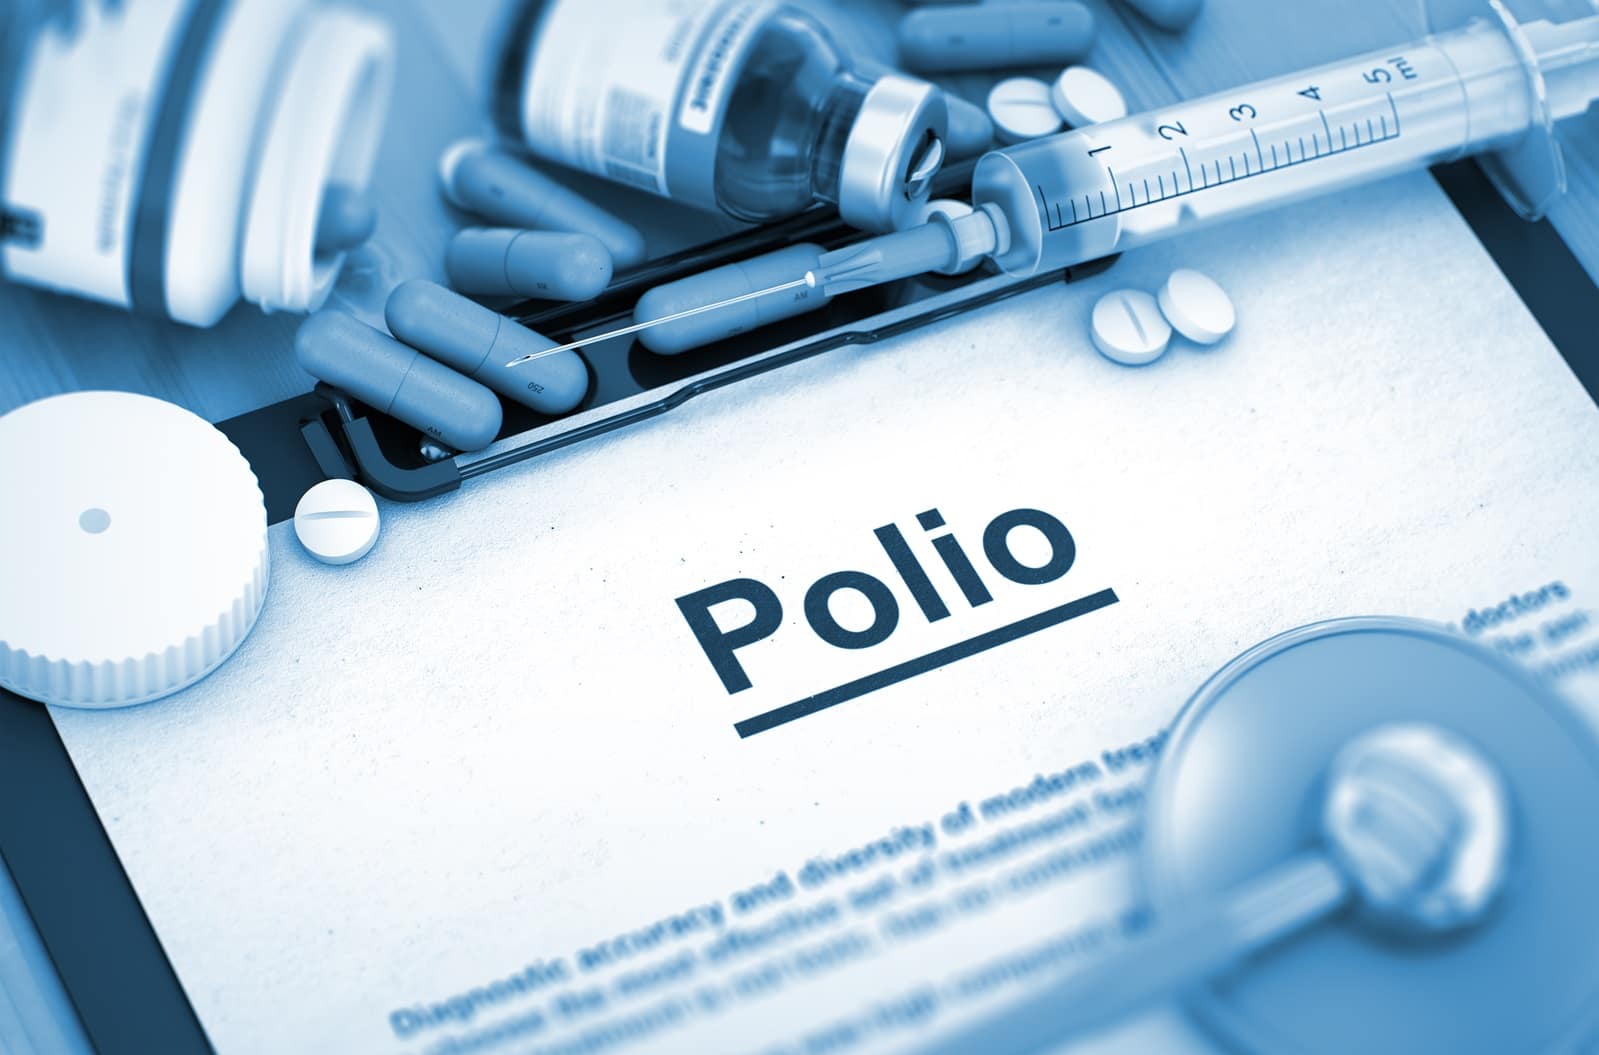 Rapid Polio Spread In New York: All You Need To Know